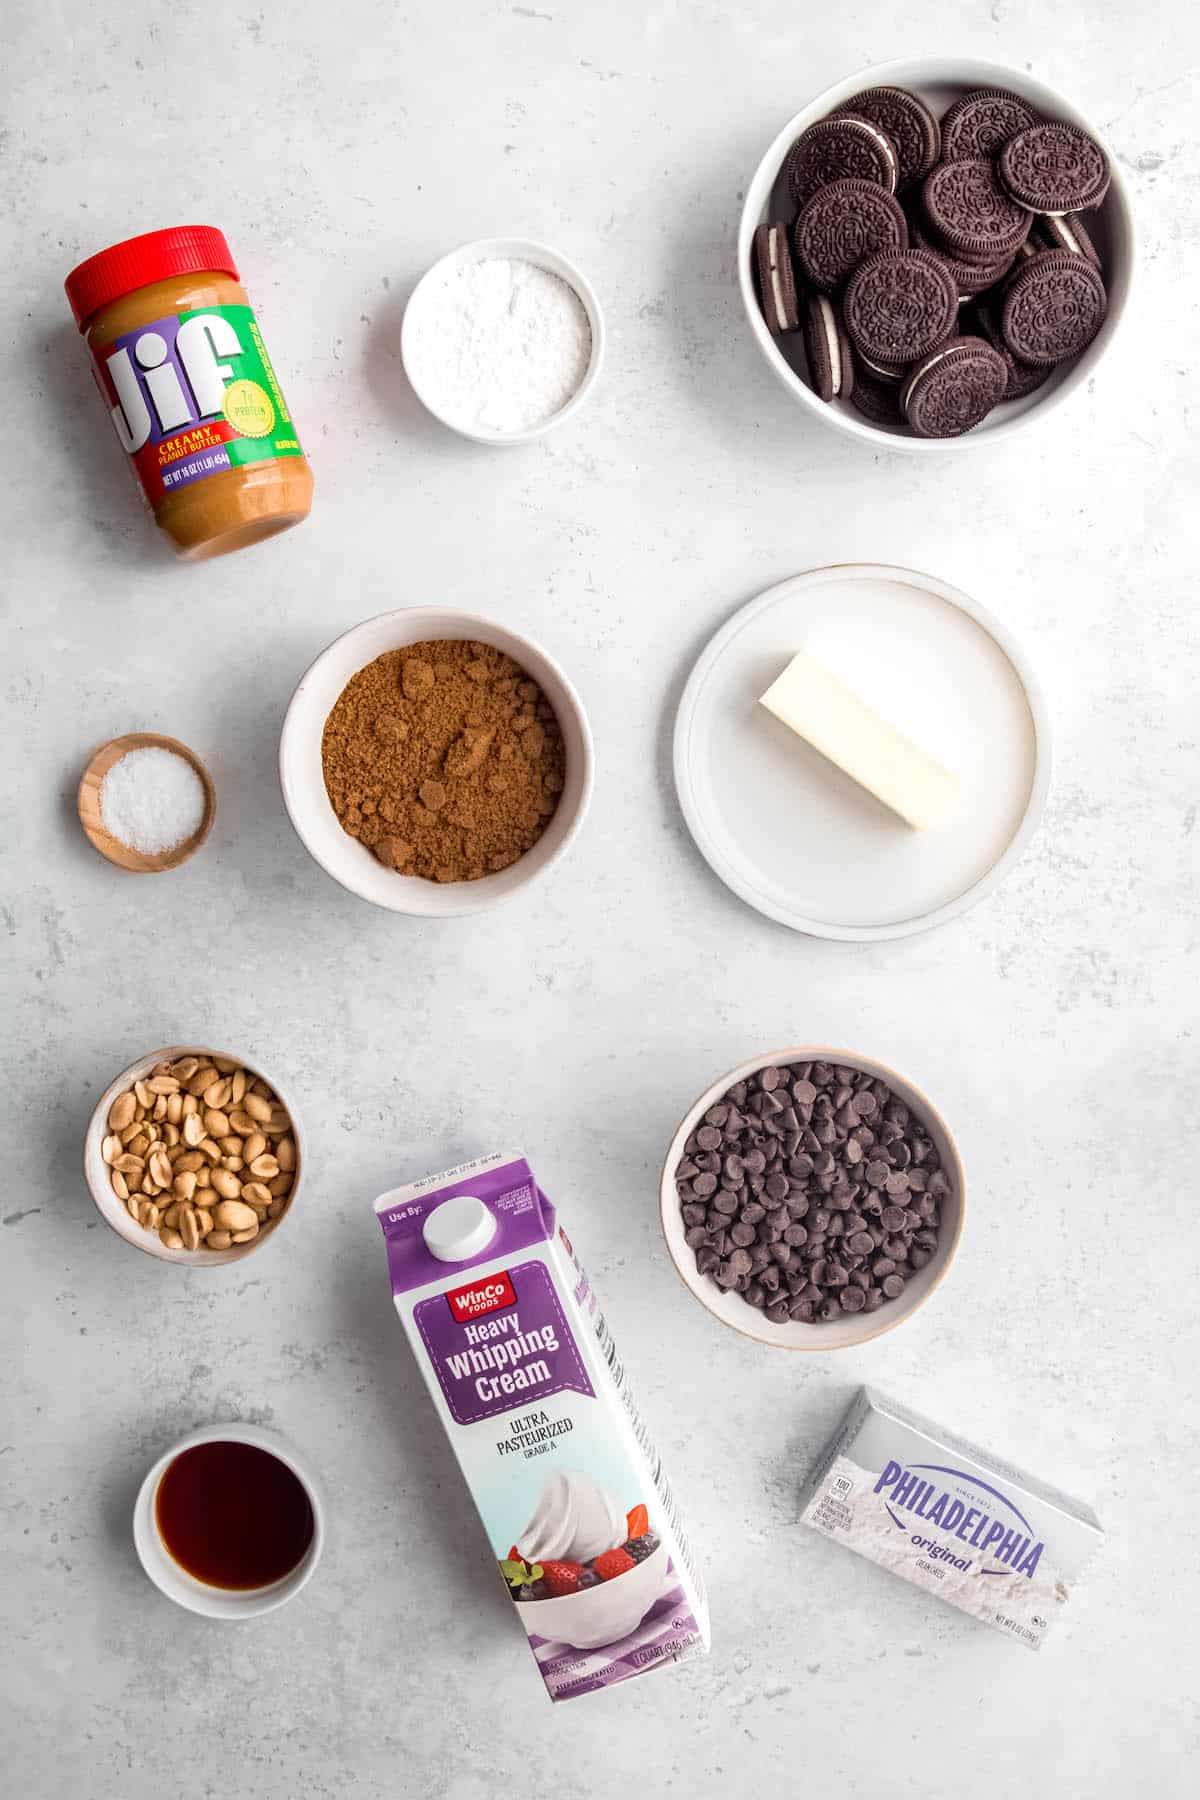 ingredients needed to make chocolate peanut butter pie with oreo crust and chocolate peanut butter ganache measured out into bowls on a white table.